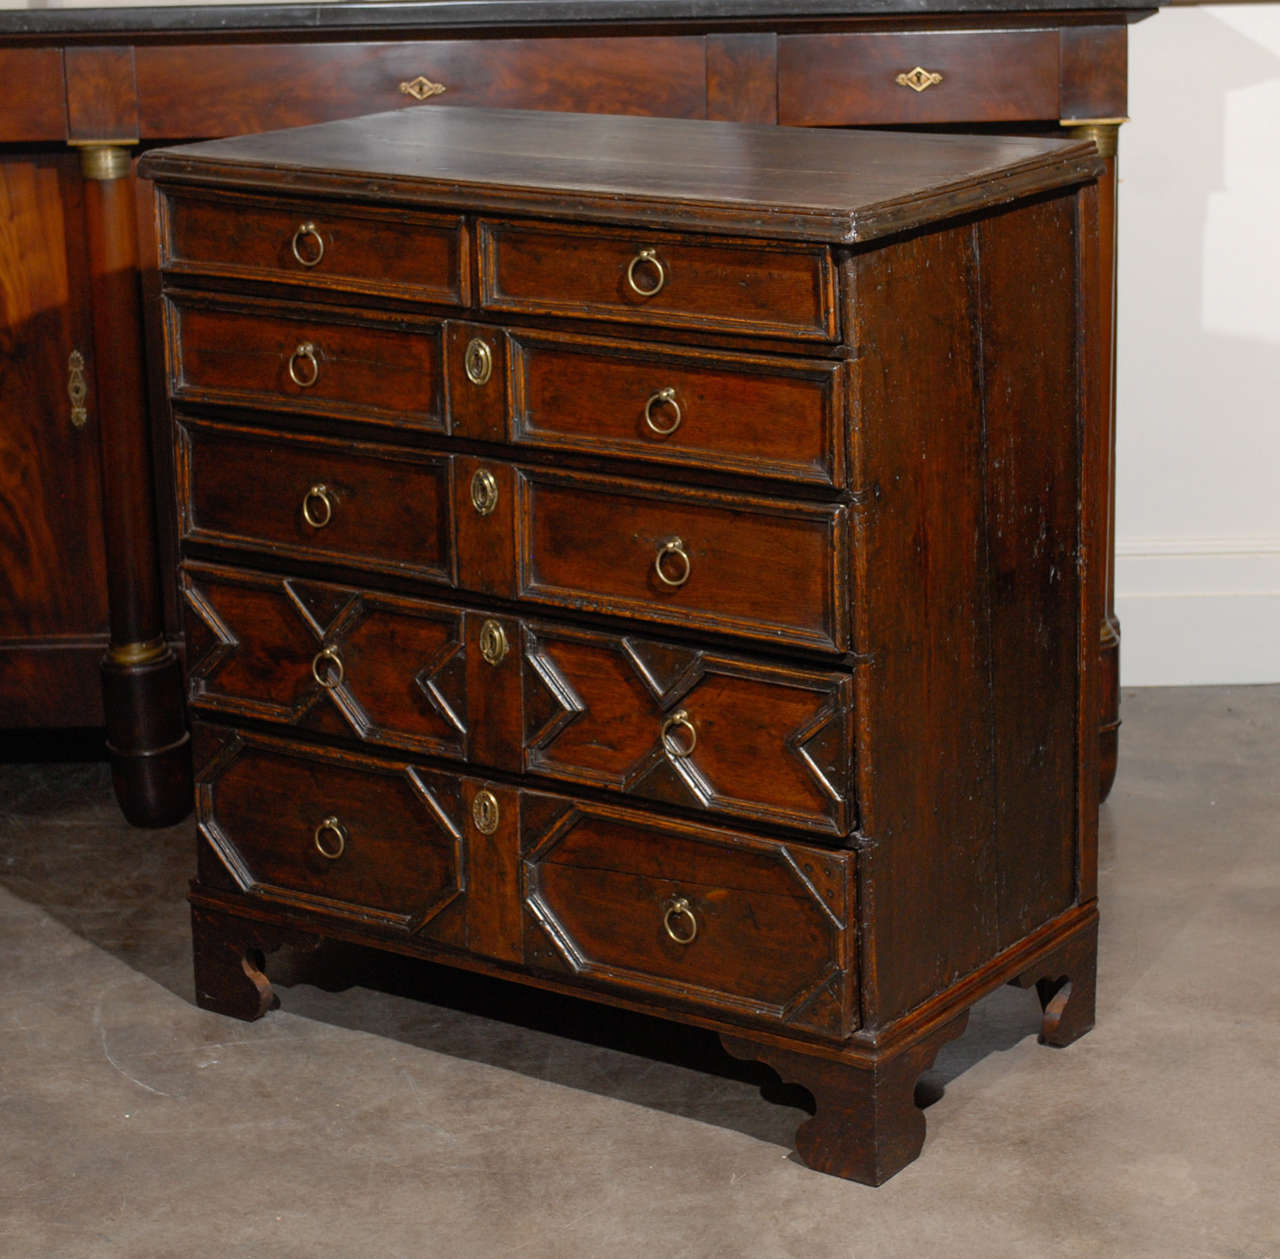 This English oak chest of drawers from the late 18th-early 19th century features a rectangular top with beautiful dovetailing. The chest is adorned with an exquisite geometric front, made of six graduated drawers with the most shallow at the top and